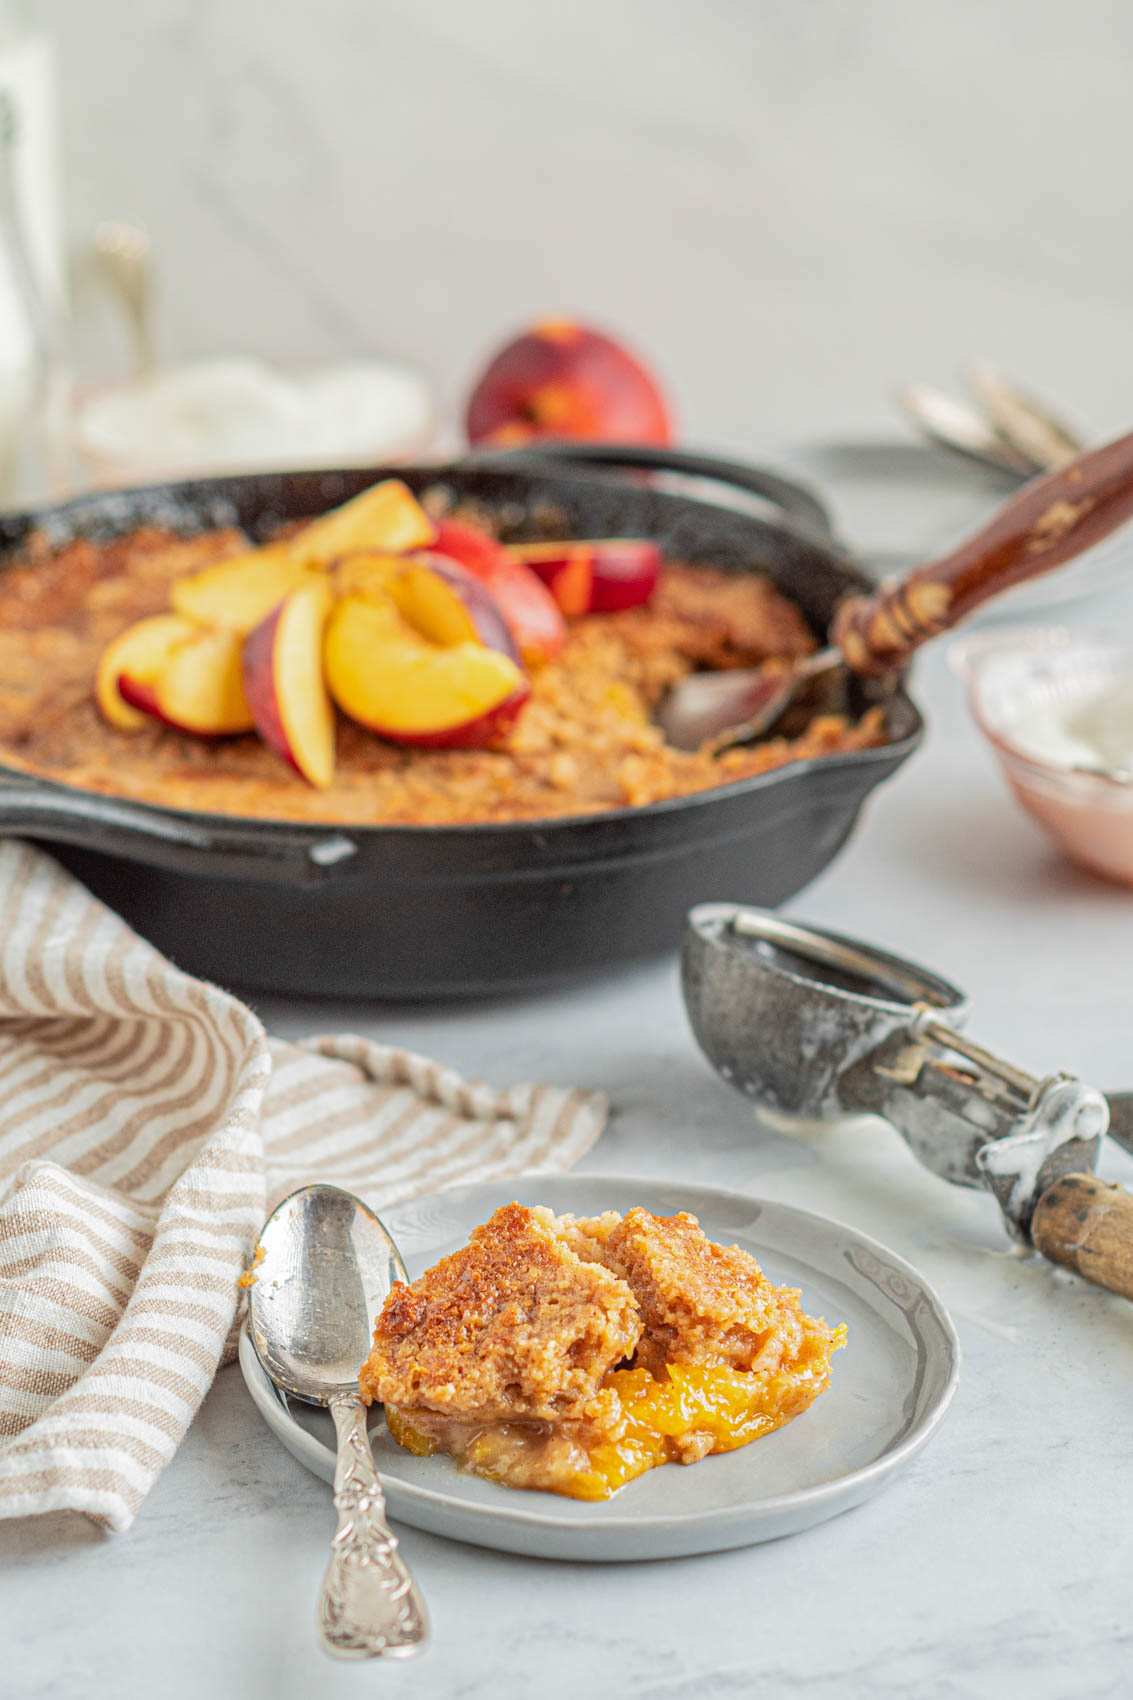 peach cobbler in a cast iron skillet with a spoon and old fashioned spoon